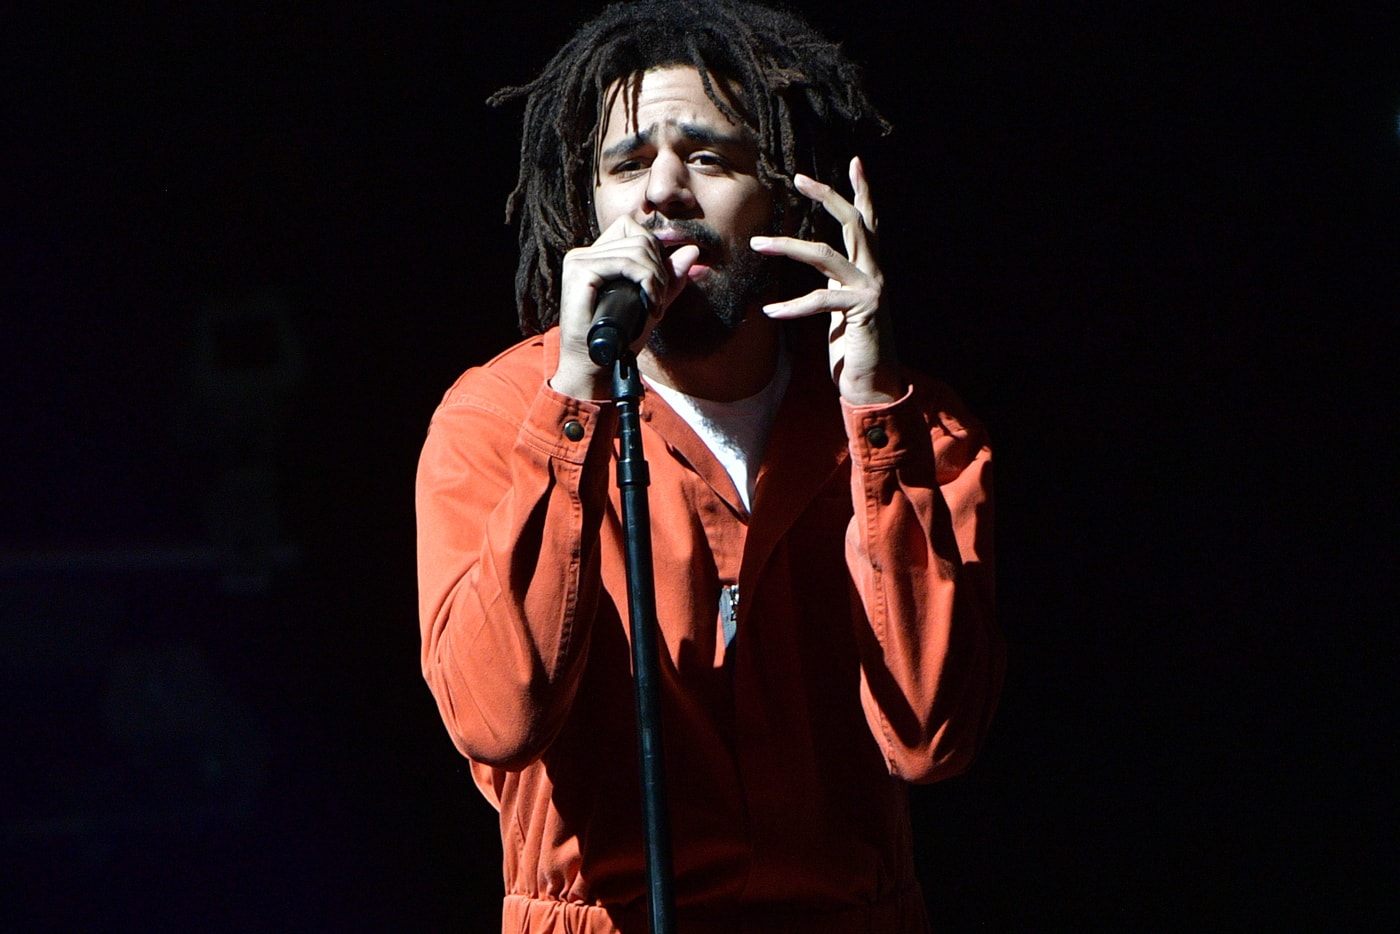 J. Cole 'K.O.D.' Deluxe Version twitter question and answer